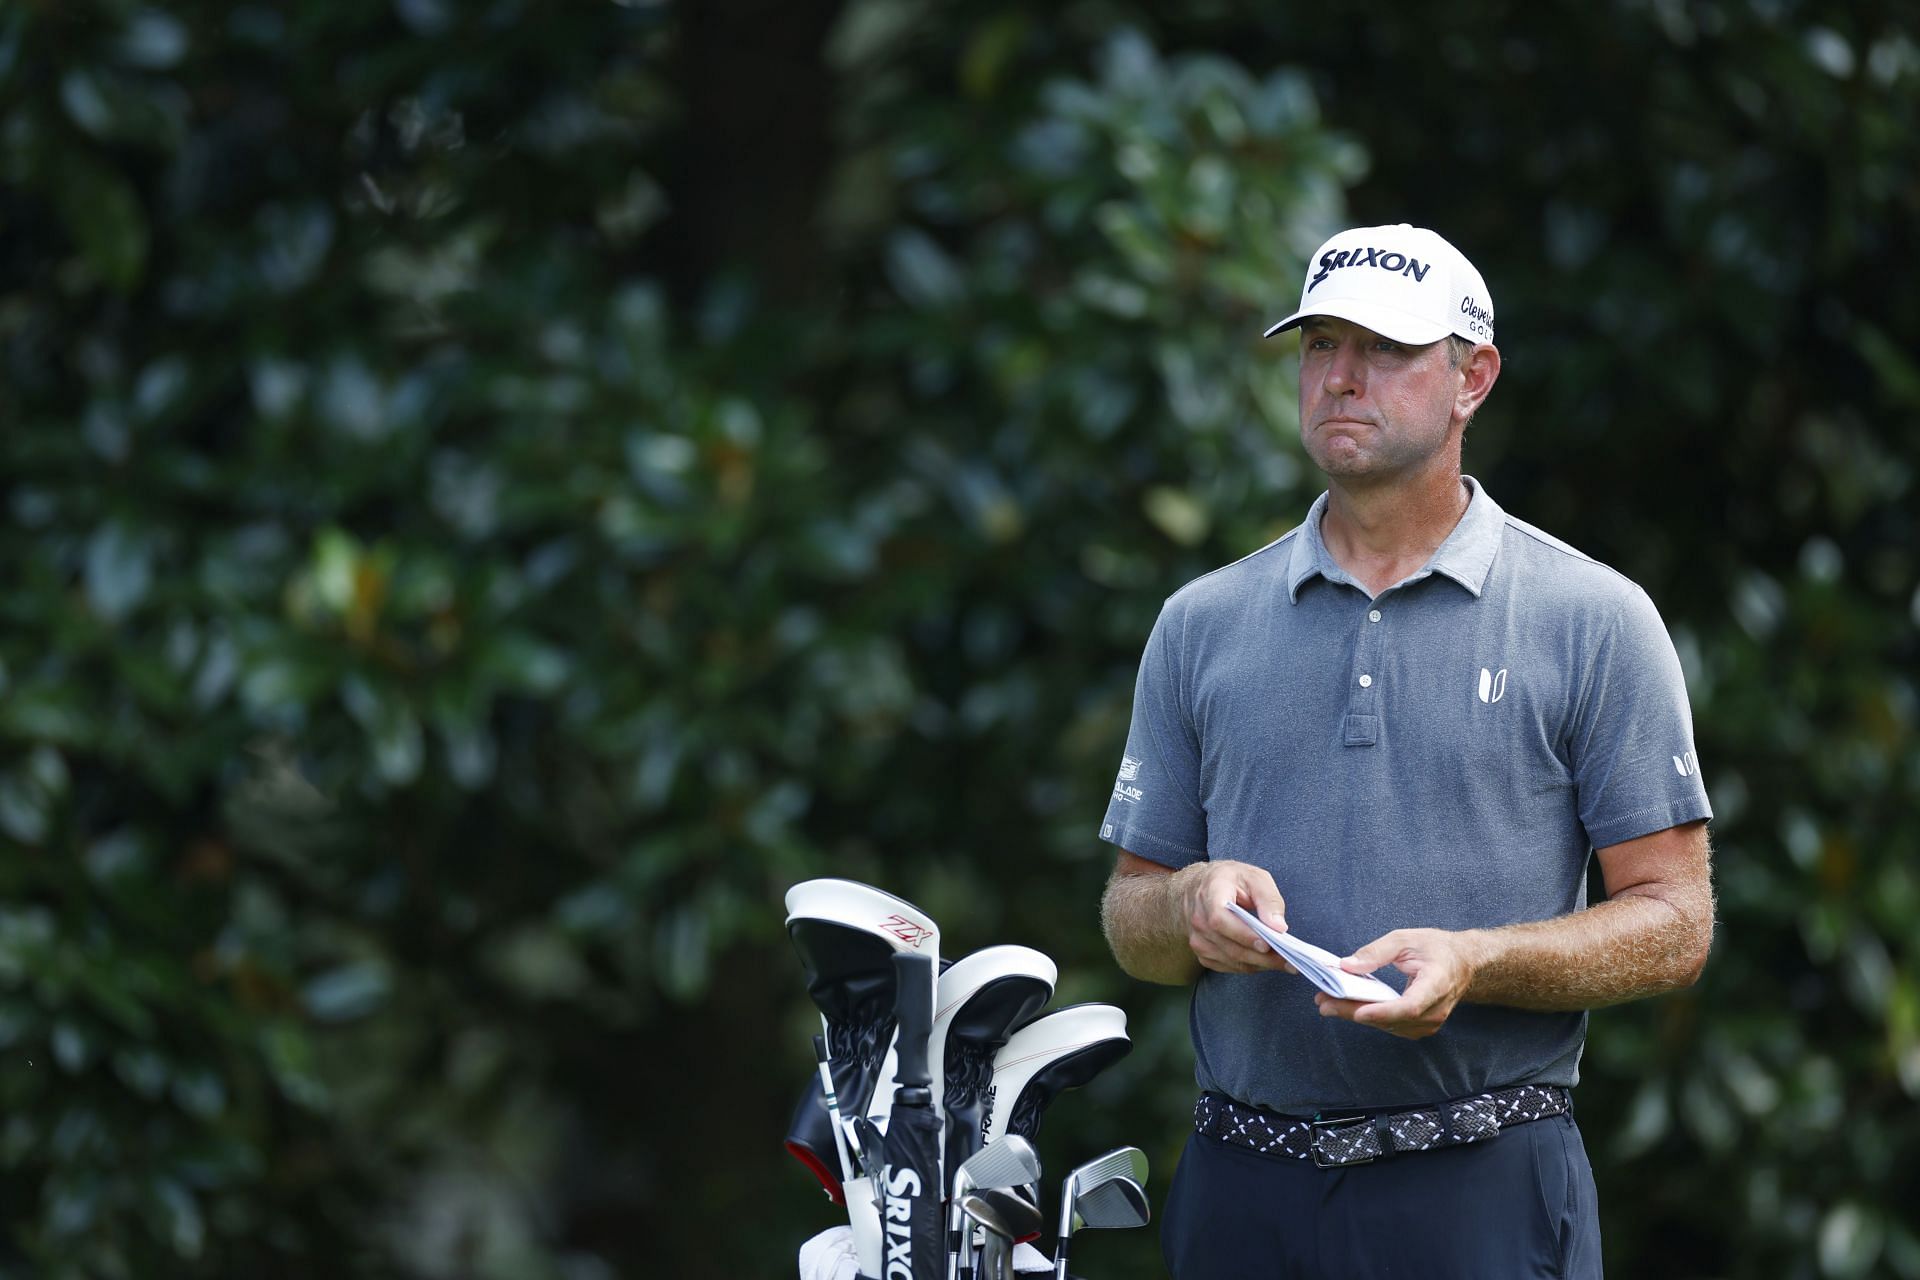 Could Lucas Glover round out the Hero World Challenge field?